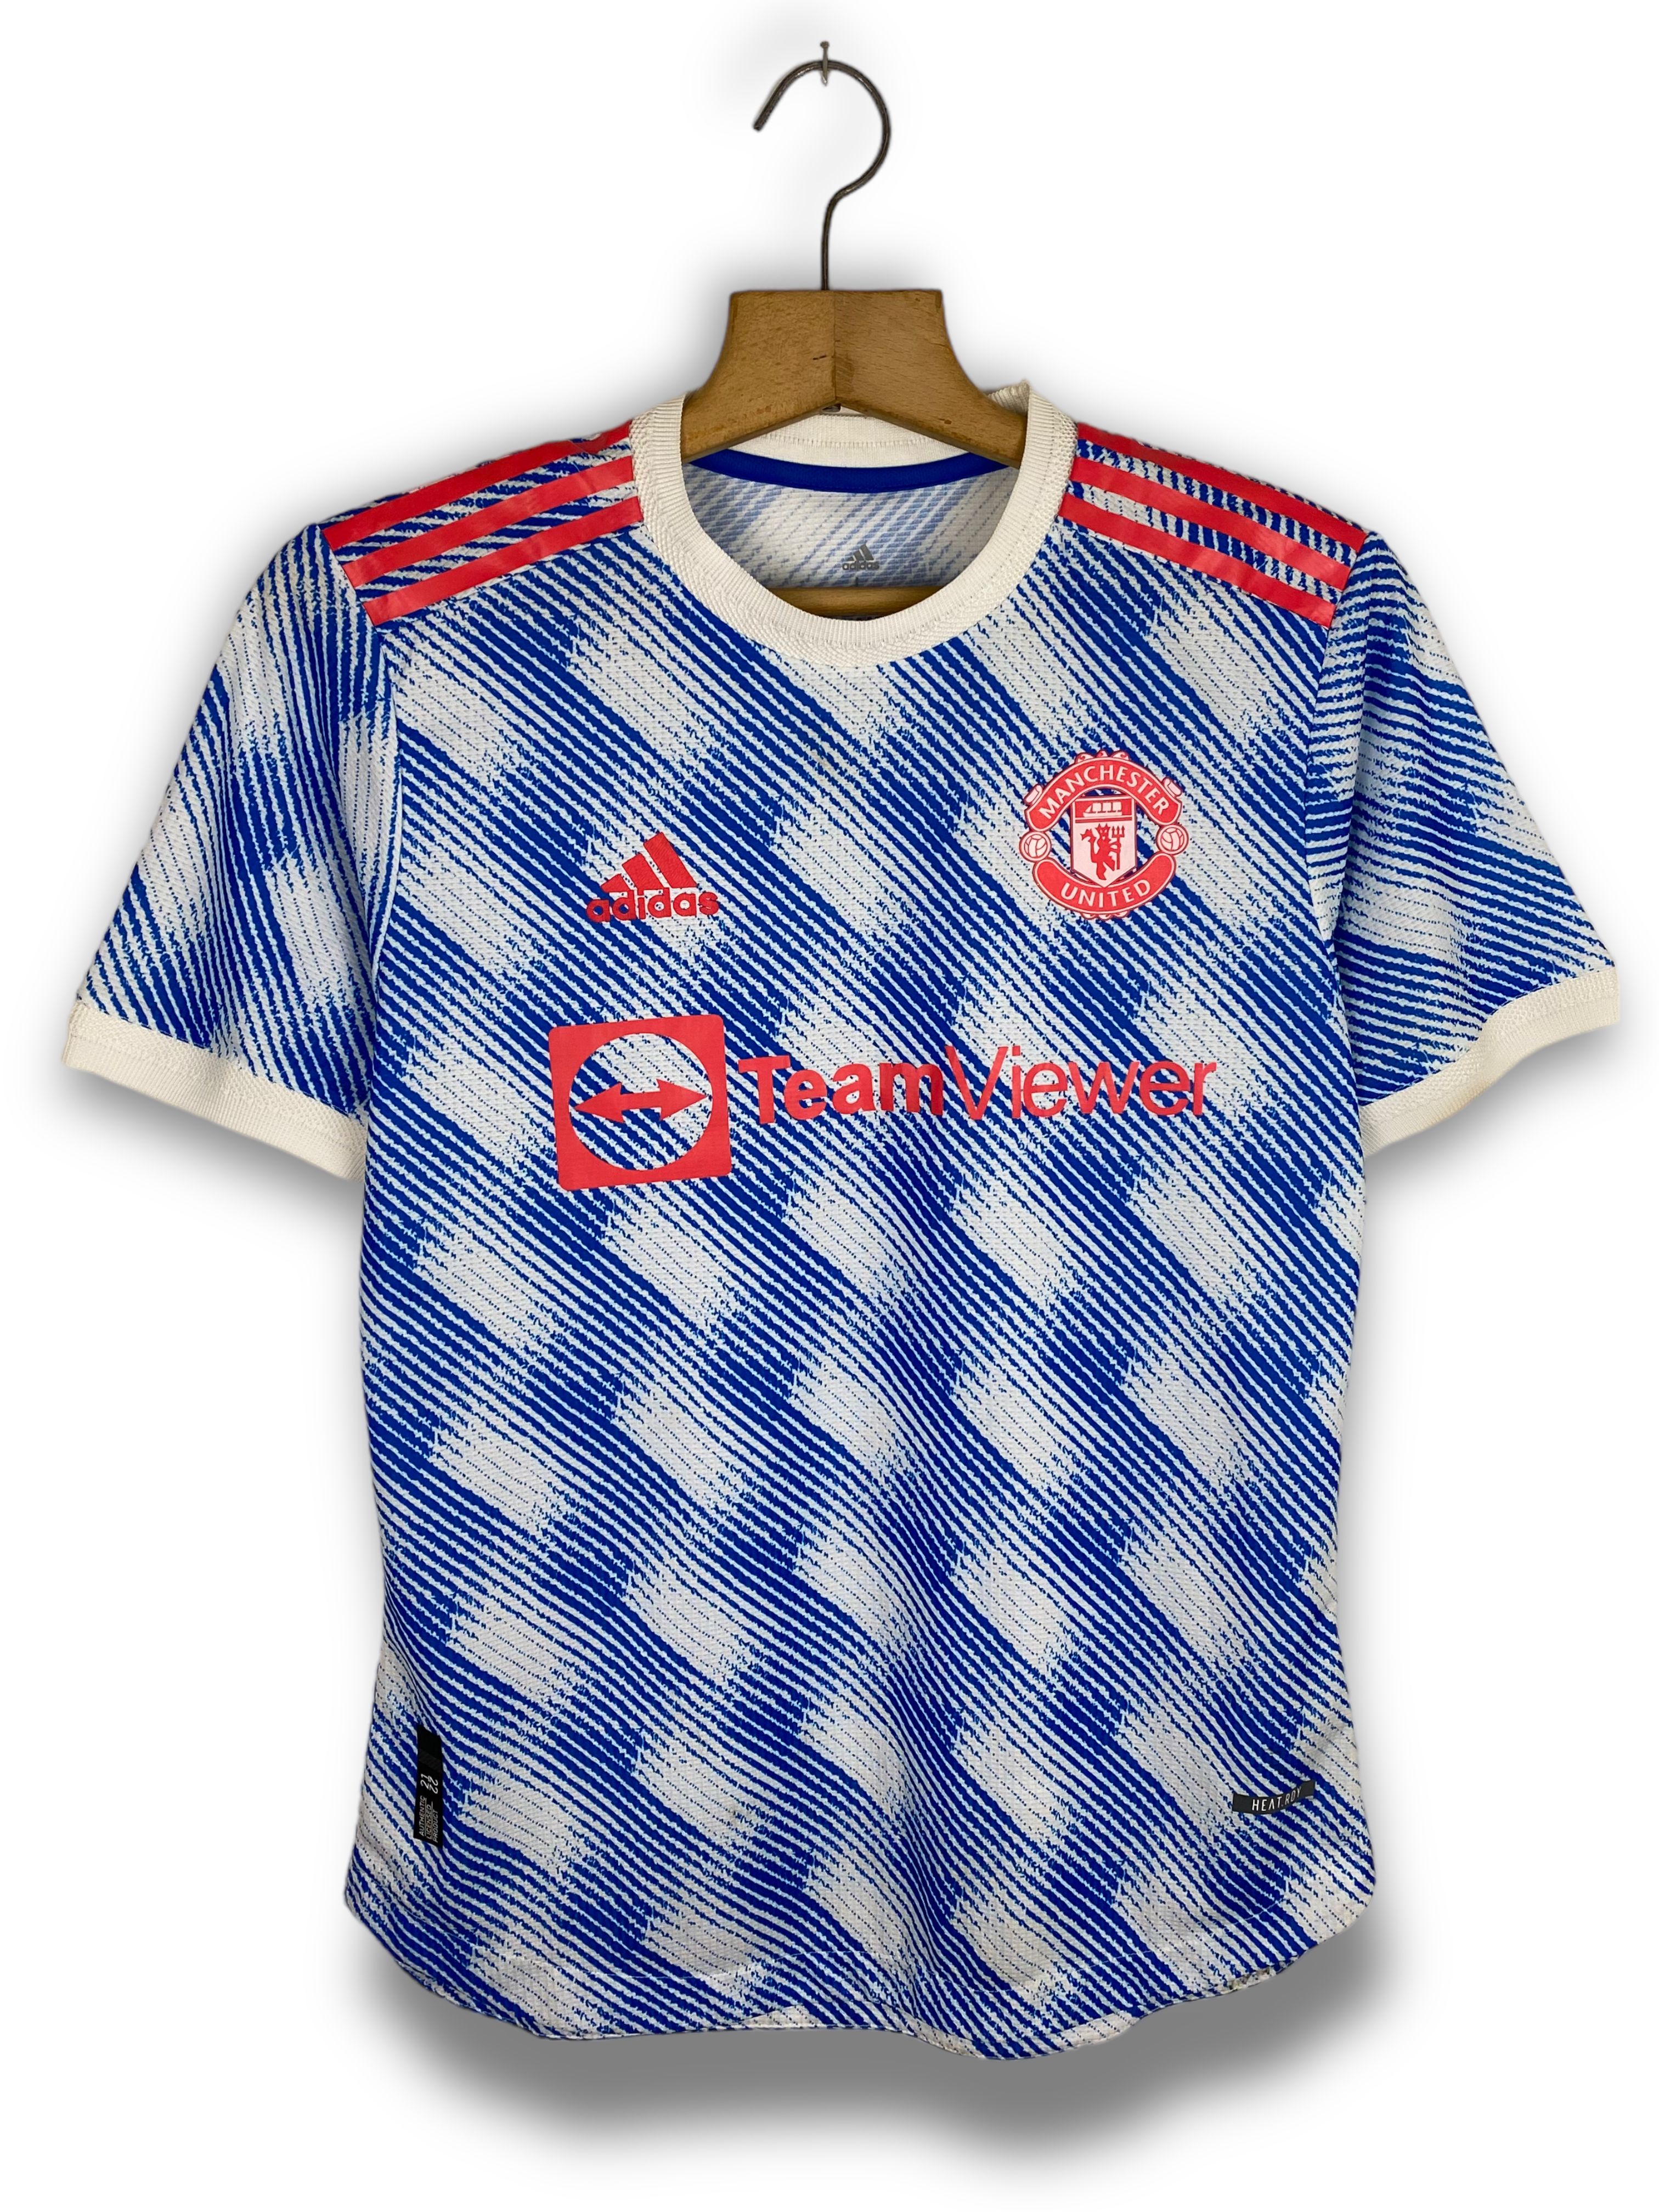 Pre-owned Adidas X Manchester United 21/22 Adidas Manchester United Teamviewer Soccer Jersey M508 In Pattern